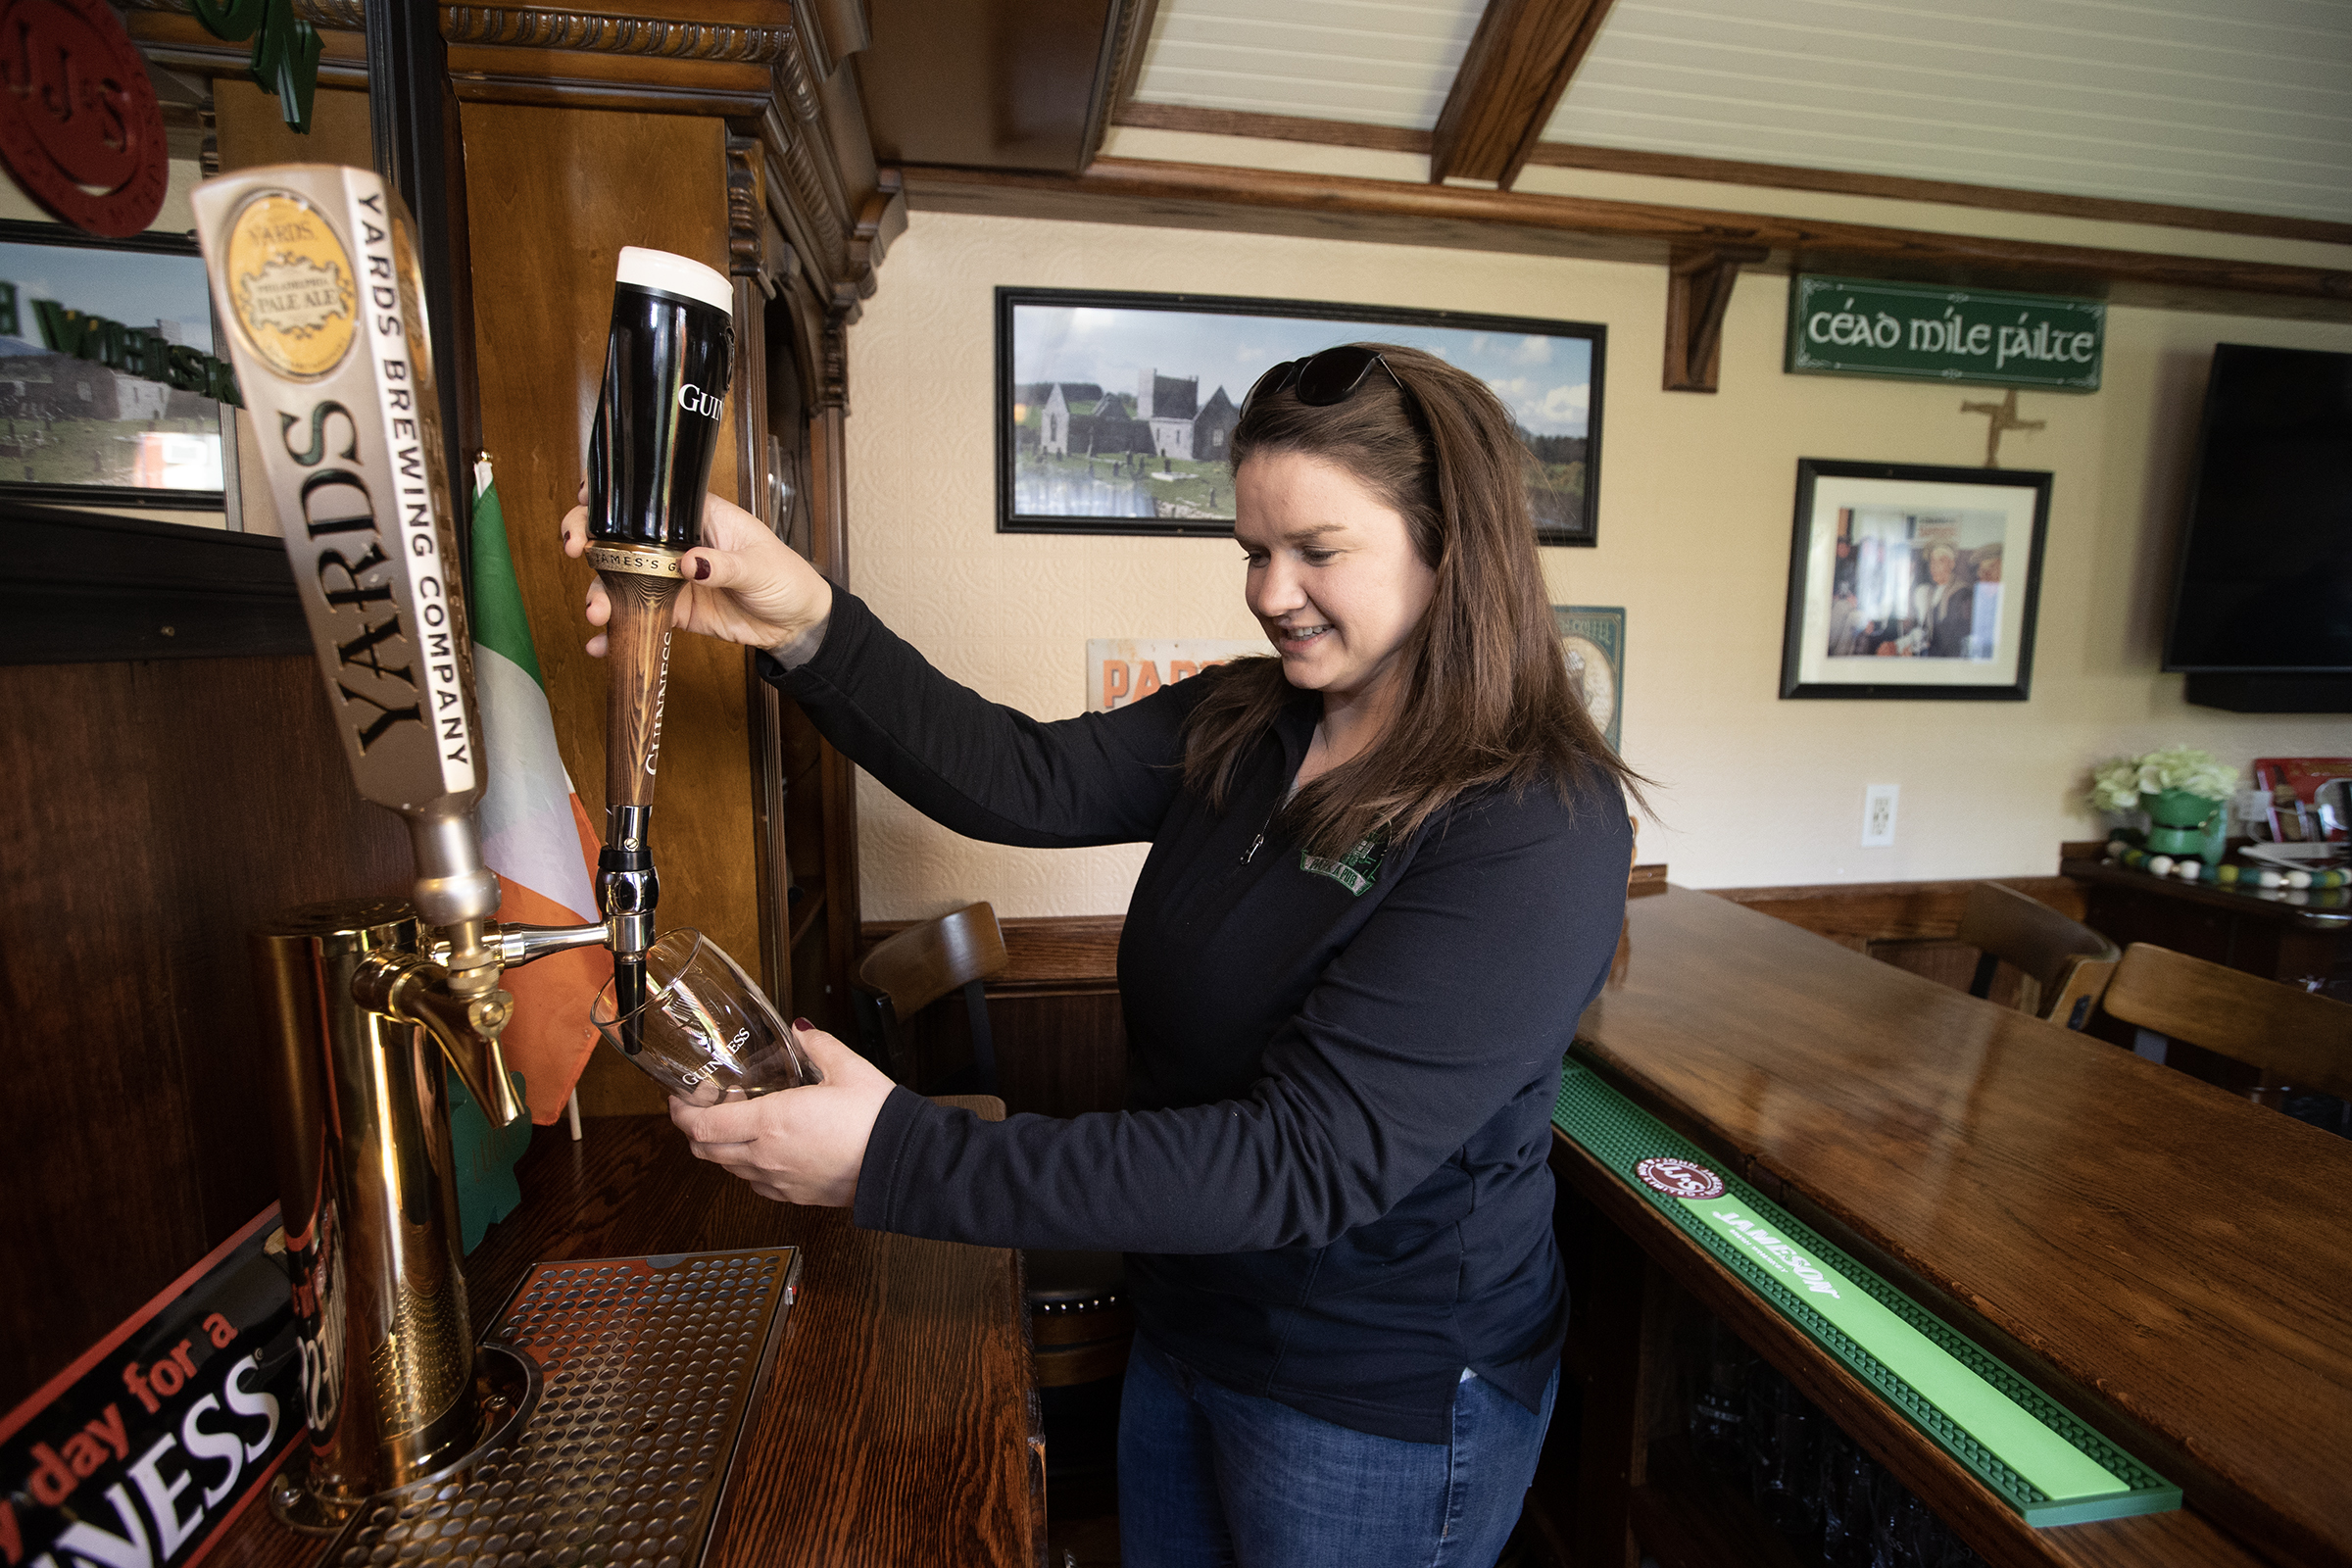 Local Business Will Bring The Irish Pub To You – Tiny Pubs